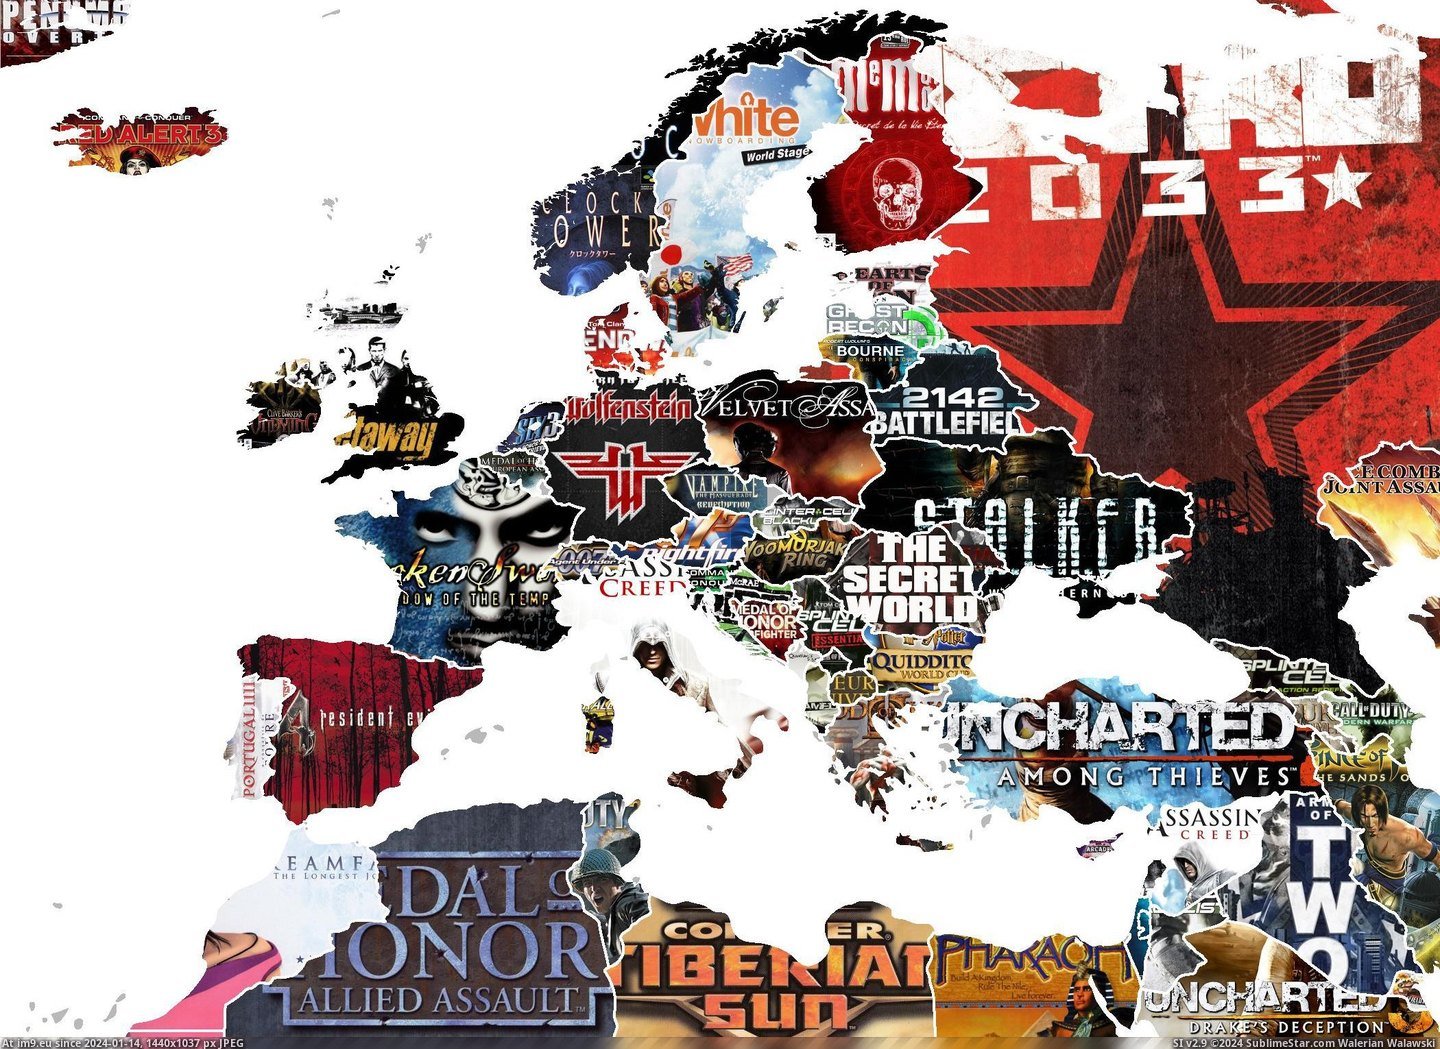 #Video #Map #Europe #Areas #Surrounding #2100x1525 #Showing #Games #Country [Mapporn] Map of Europe and surrounding areas showing video games set in each country. [2100x1525][OC] Pic. (Image of album My r/MAPS favs))